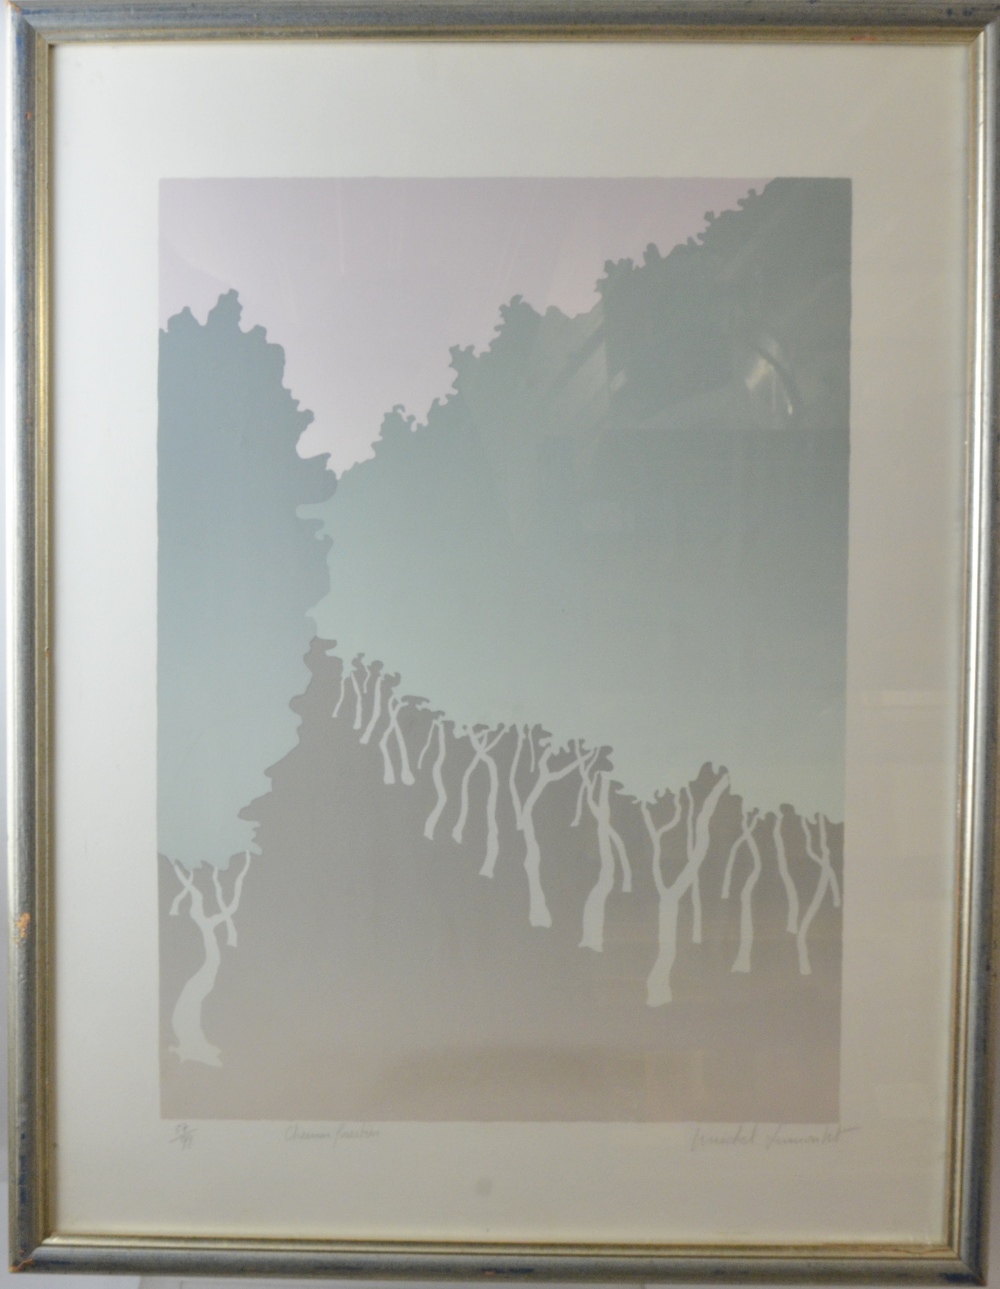 Michel Dumontet, 'Chemin Forestier', signed, limited edition print 57/99, 64.5cm x 49cm, - Image 6 of 6